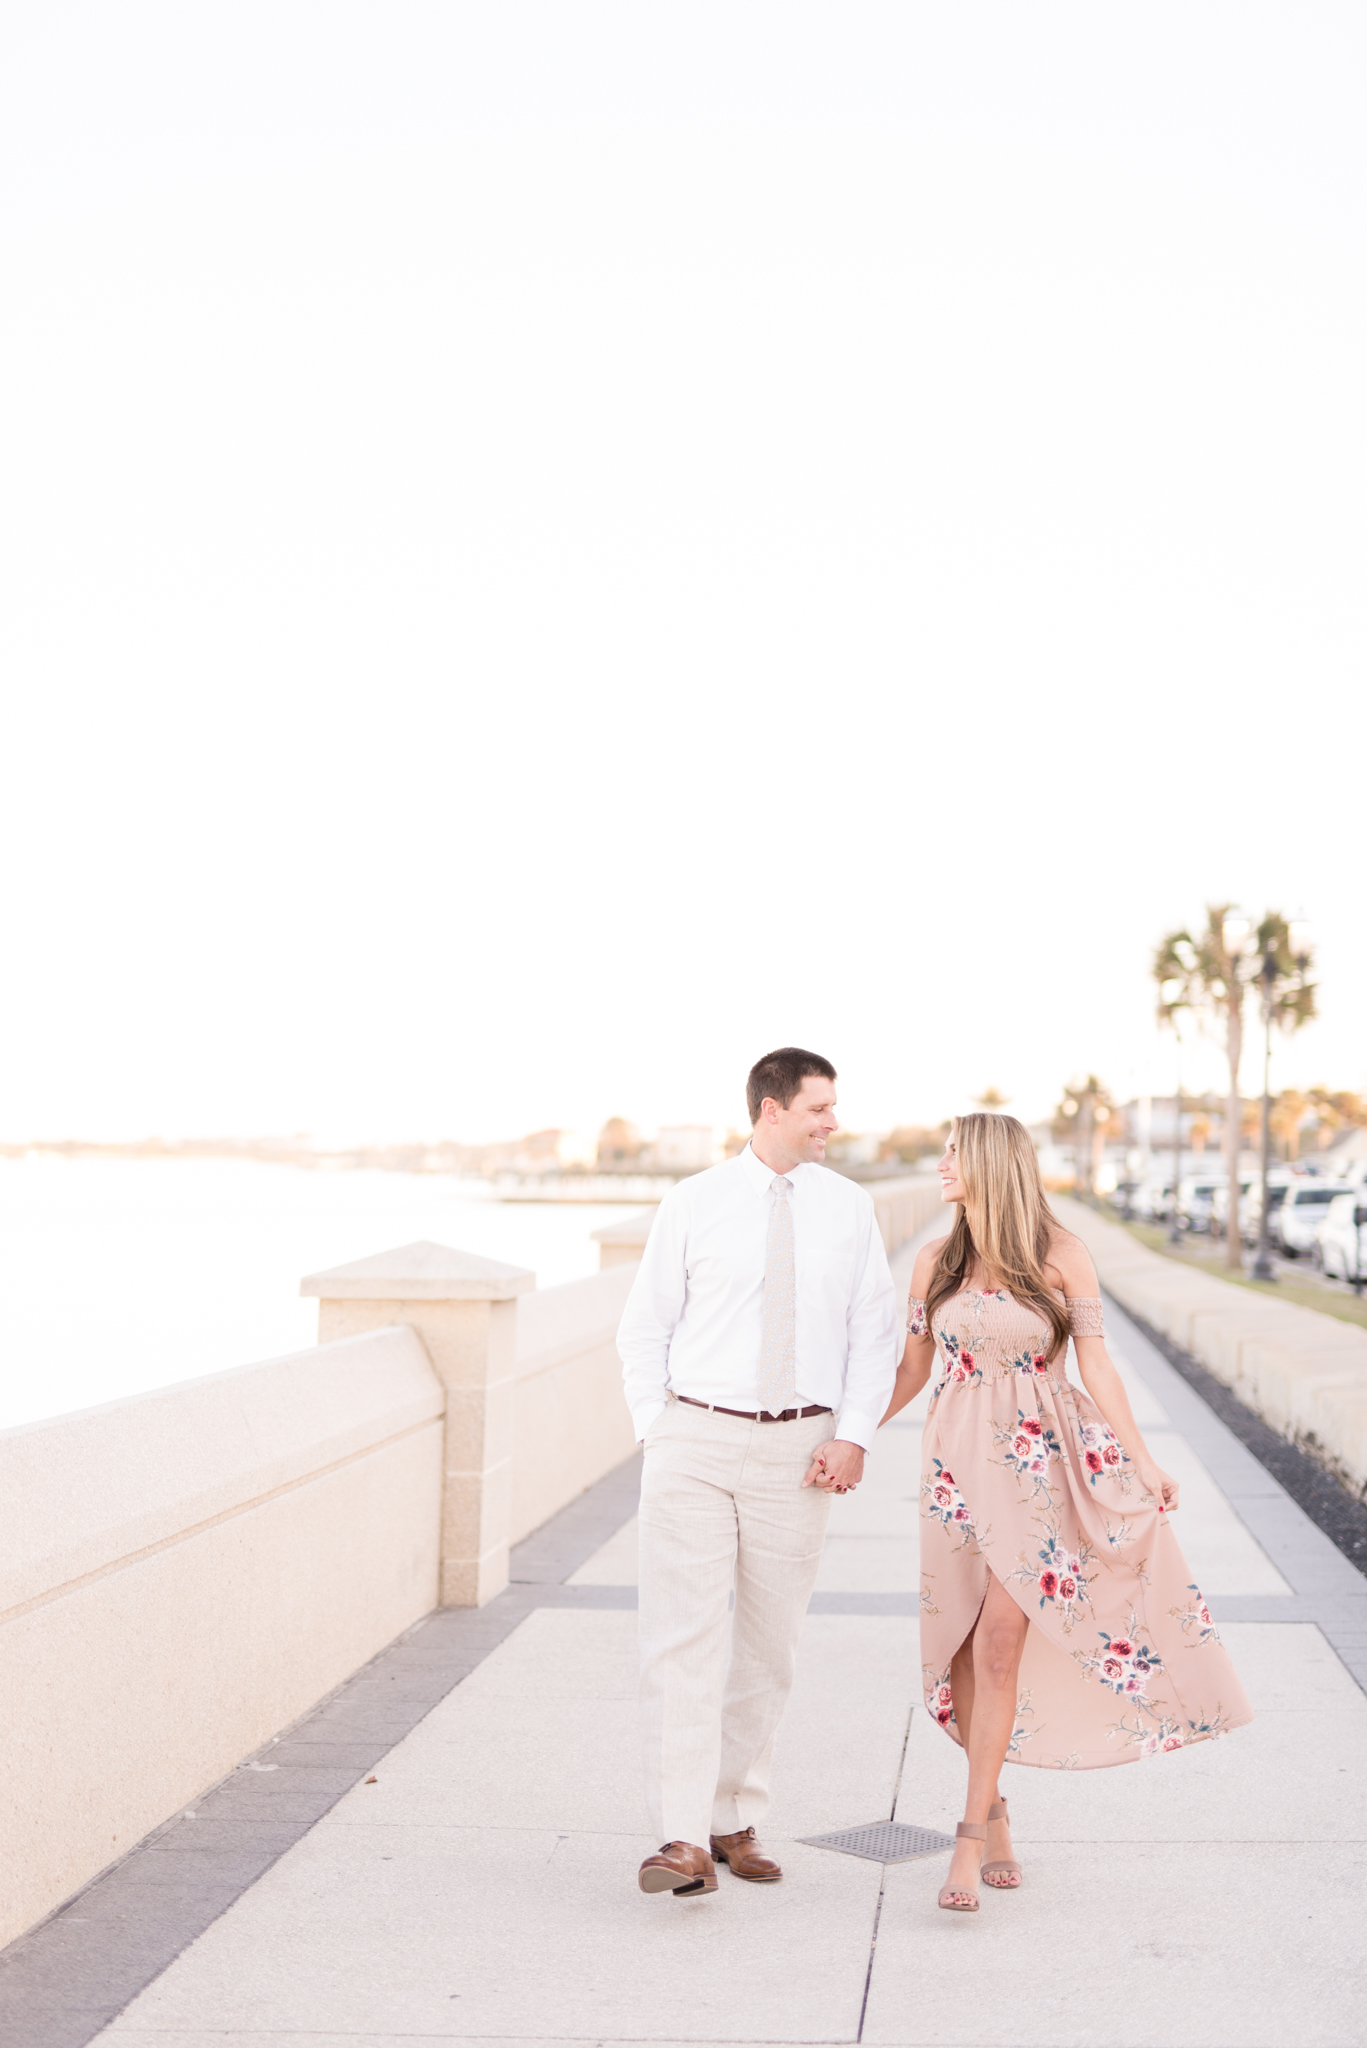 Couple walks and smiles at each other by the ocean.